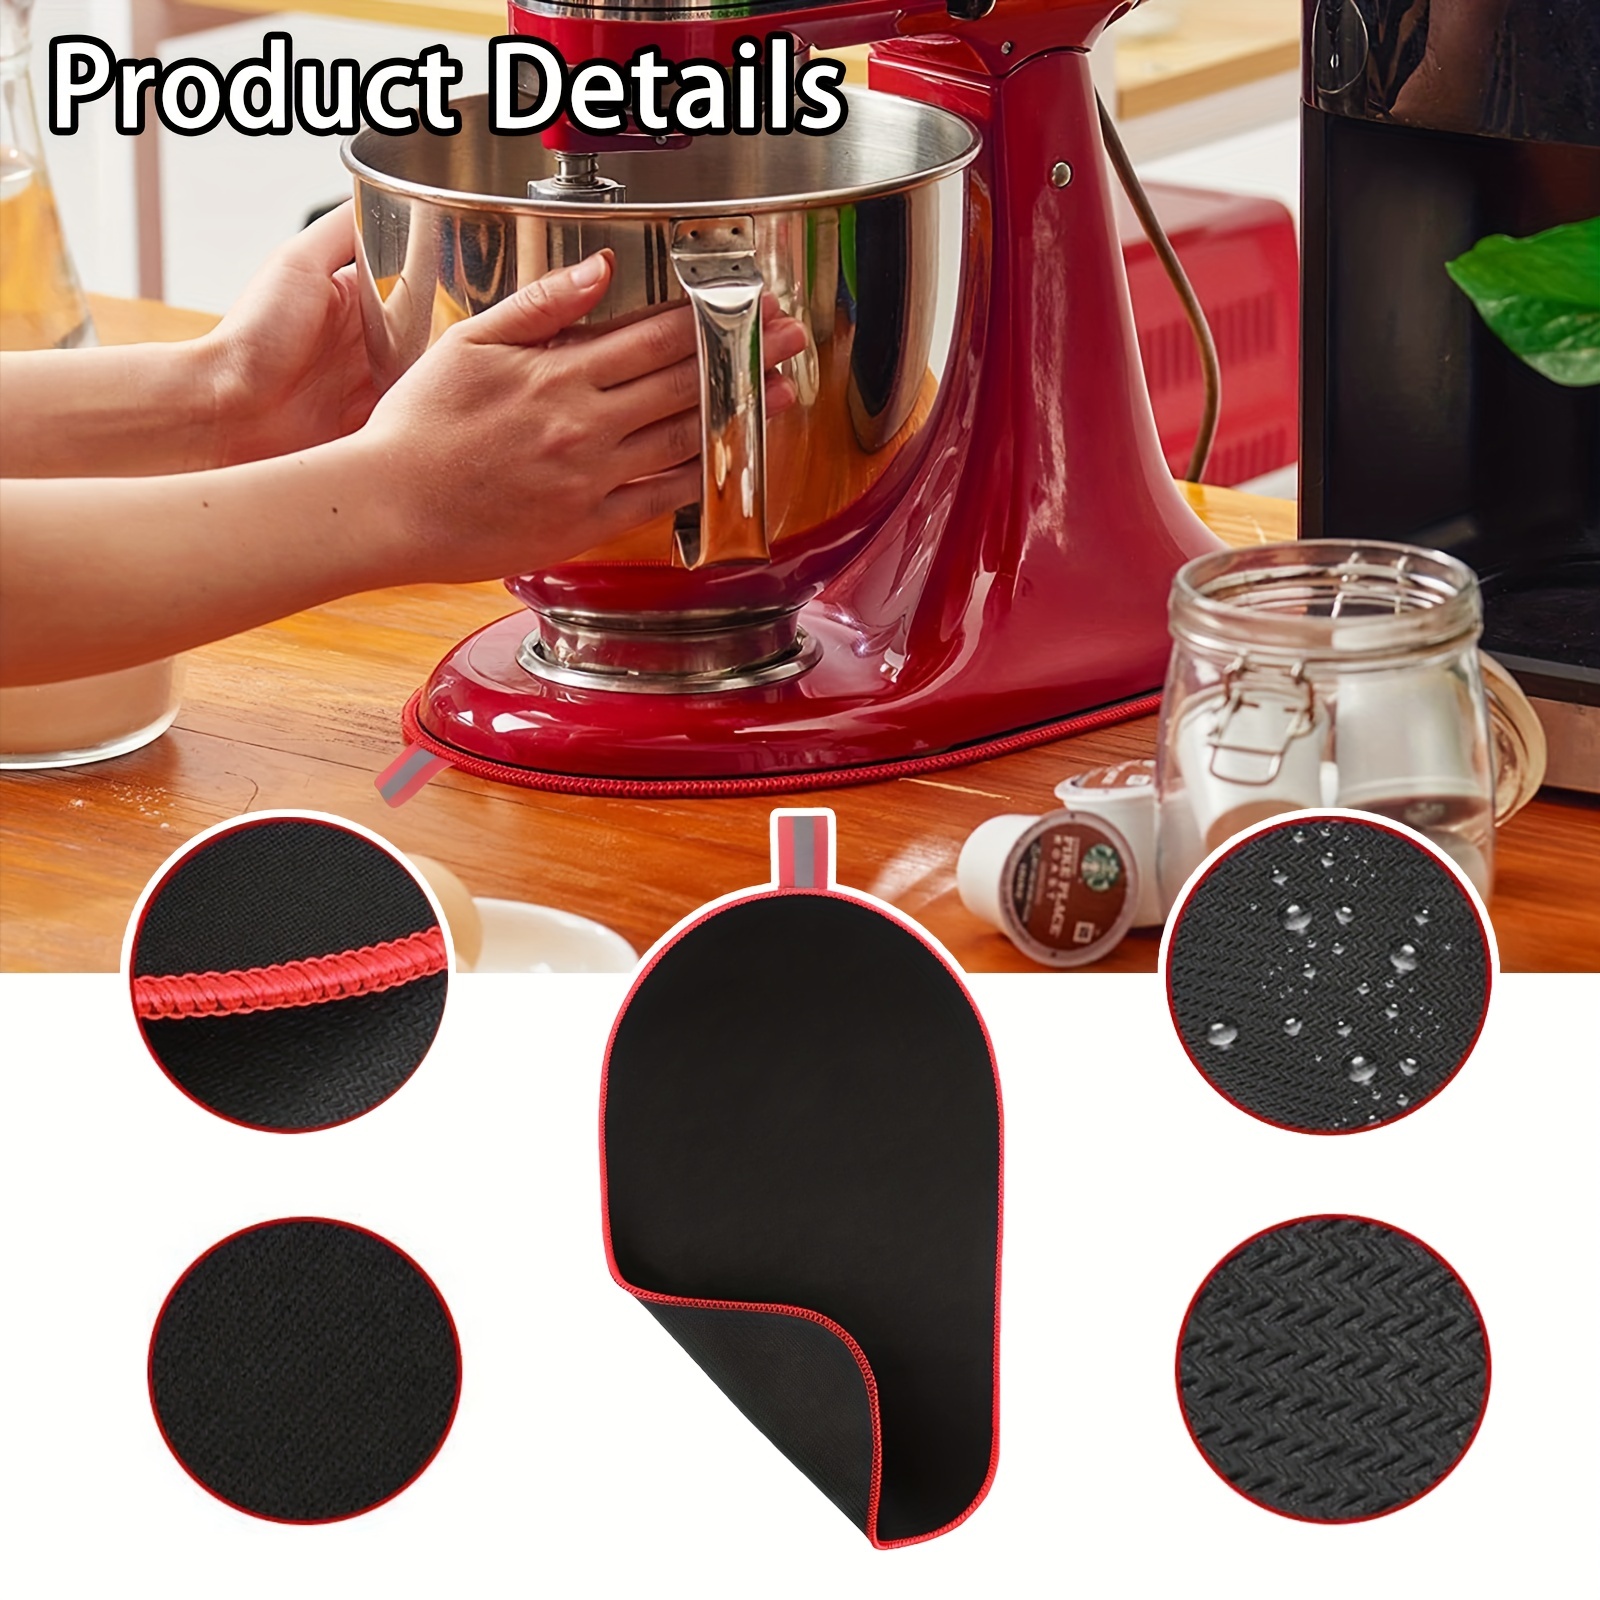 Kitchenaid Stand Mixer Sliding Mat With Cord Organizer - Protects